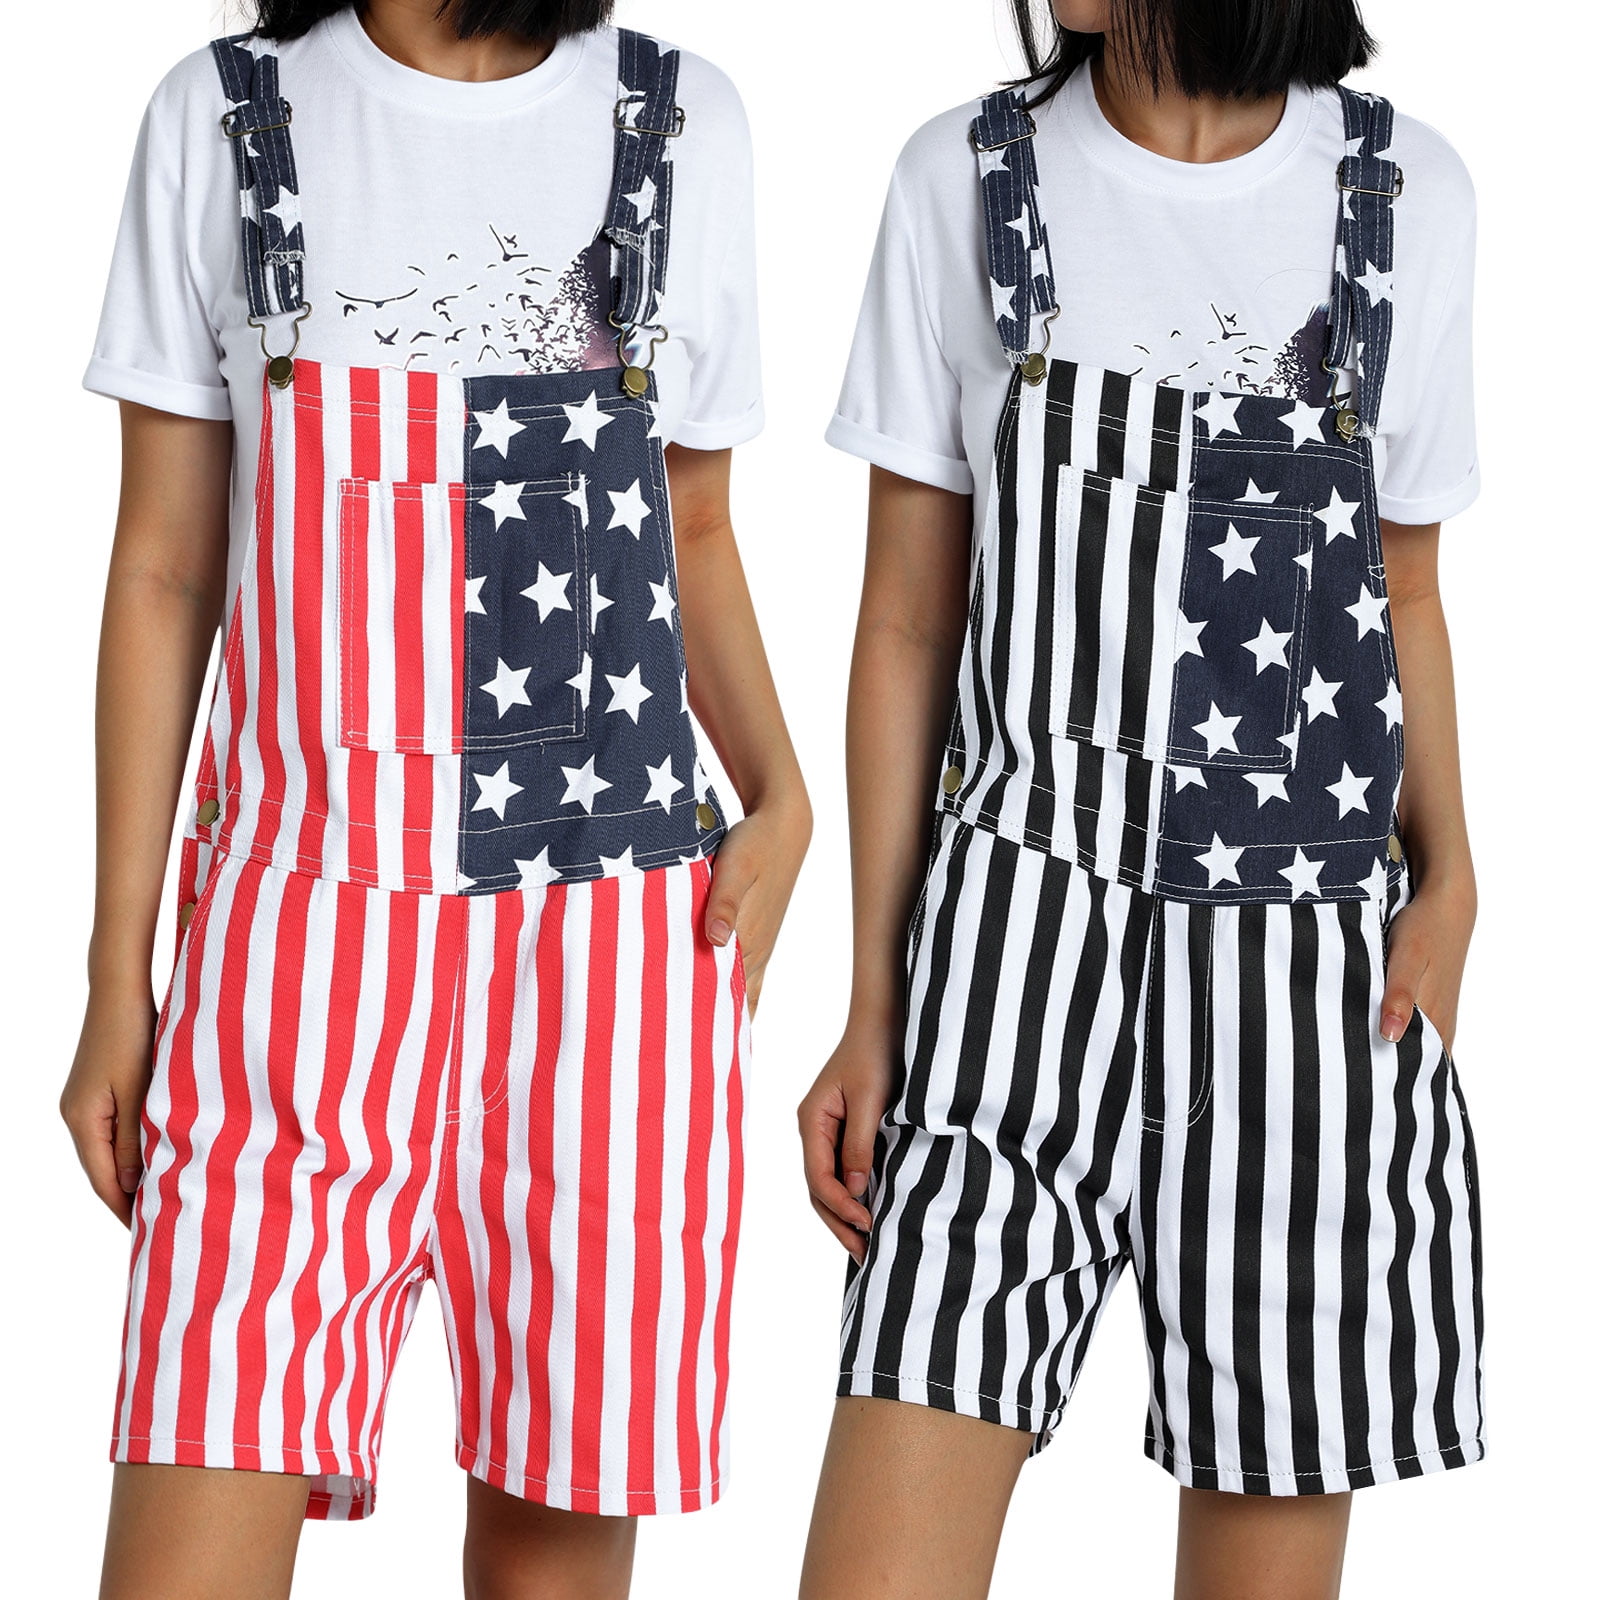 Mens Rompers Jumpsuits 4th of July American Flag Casual Overalls Bib Denim Shorts Couples Onesie Romper Jeans 